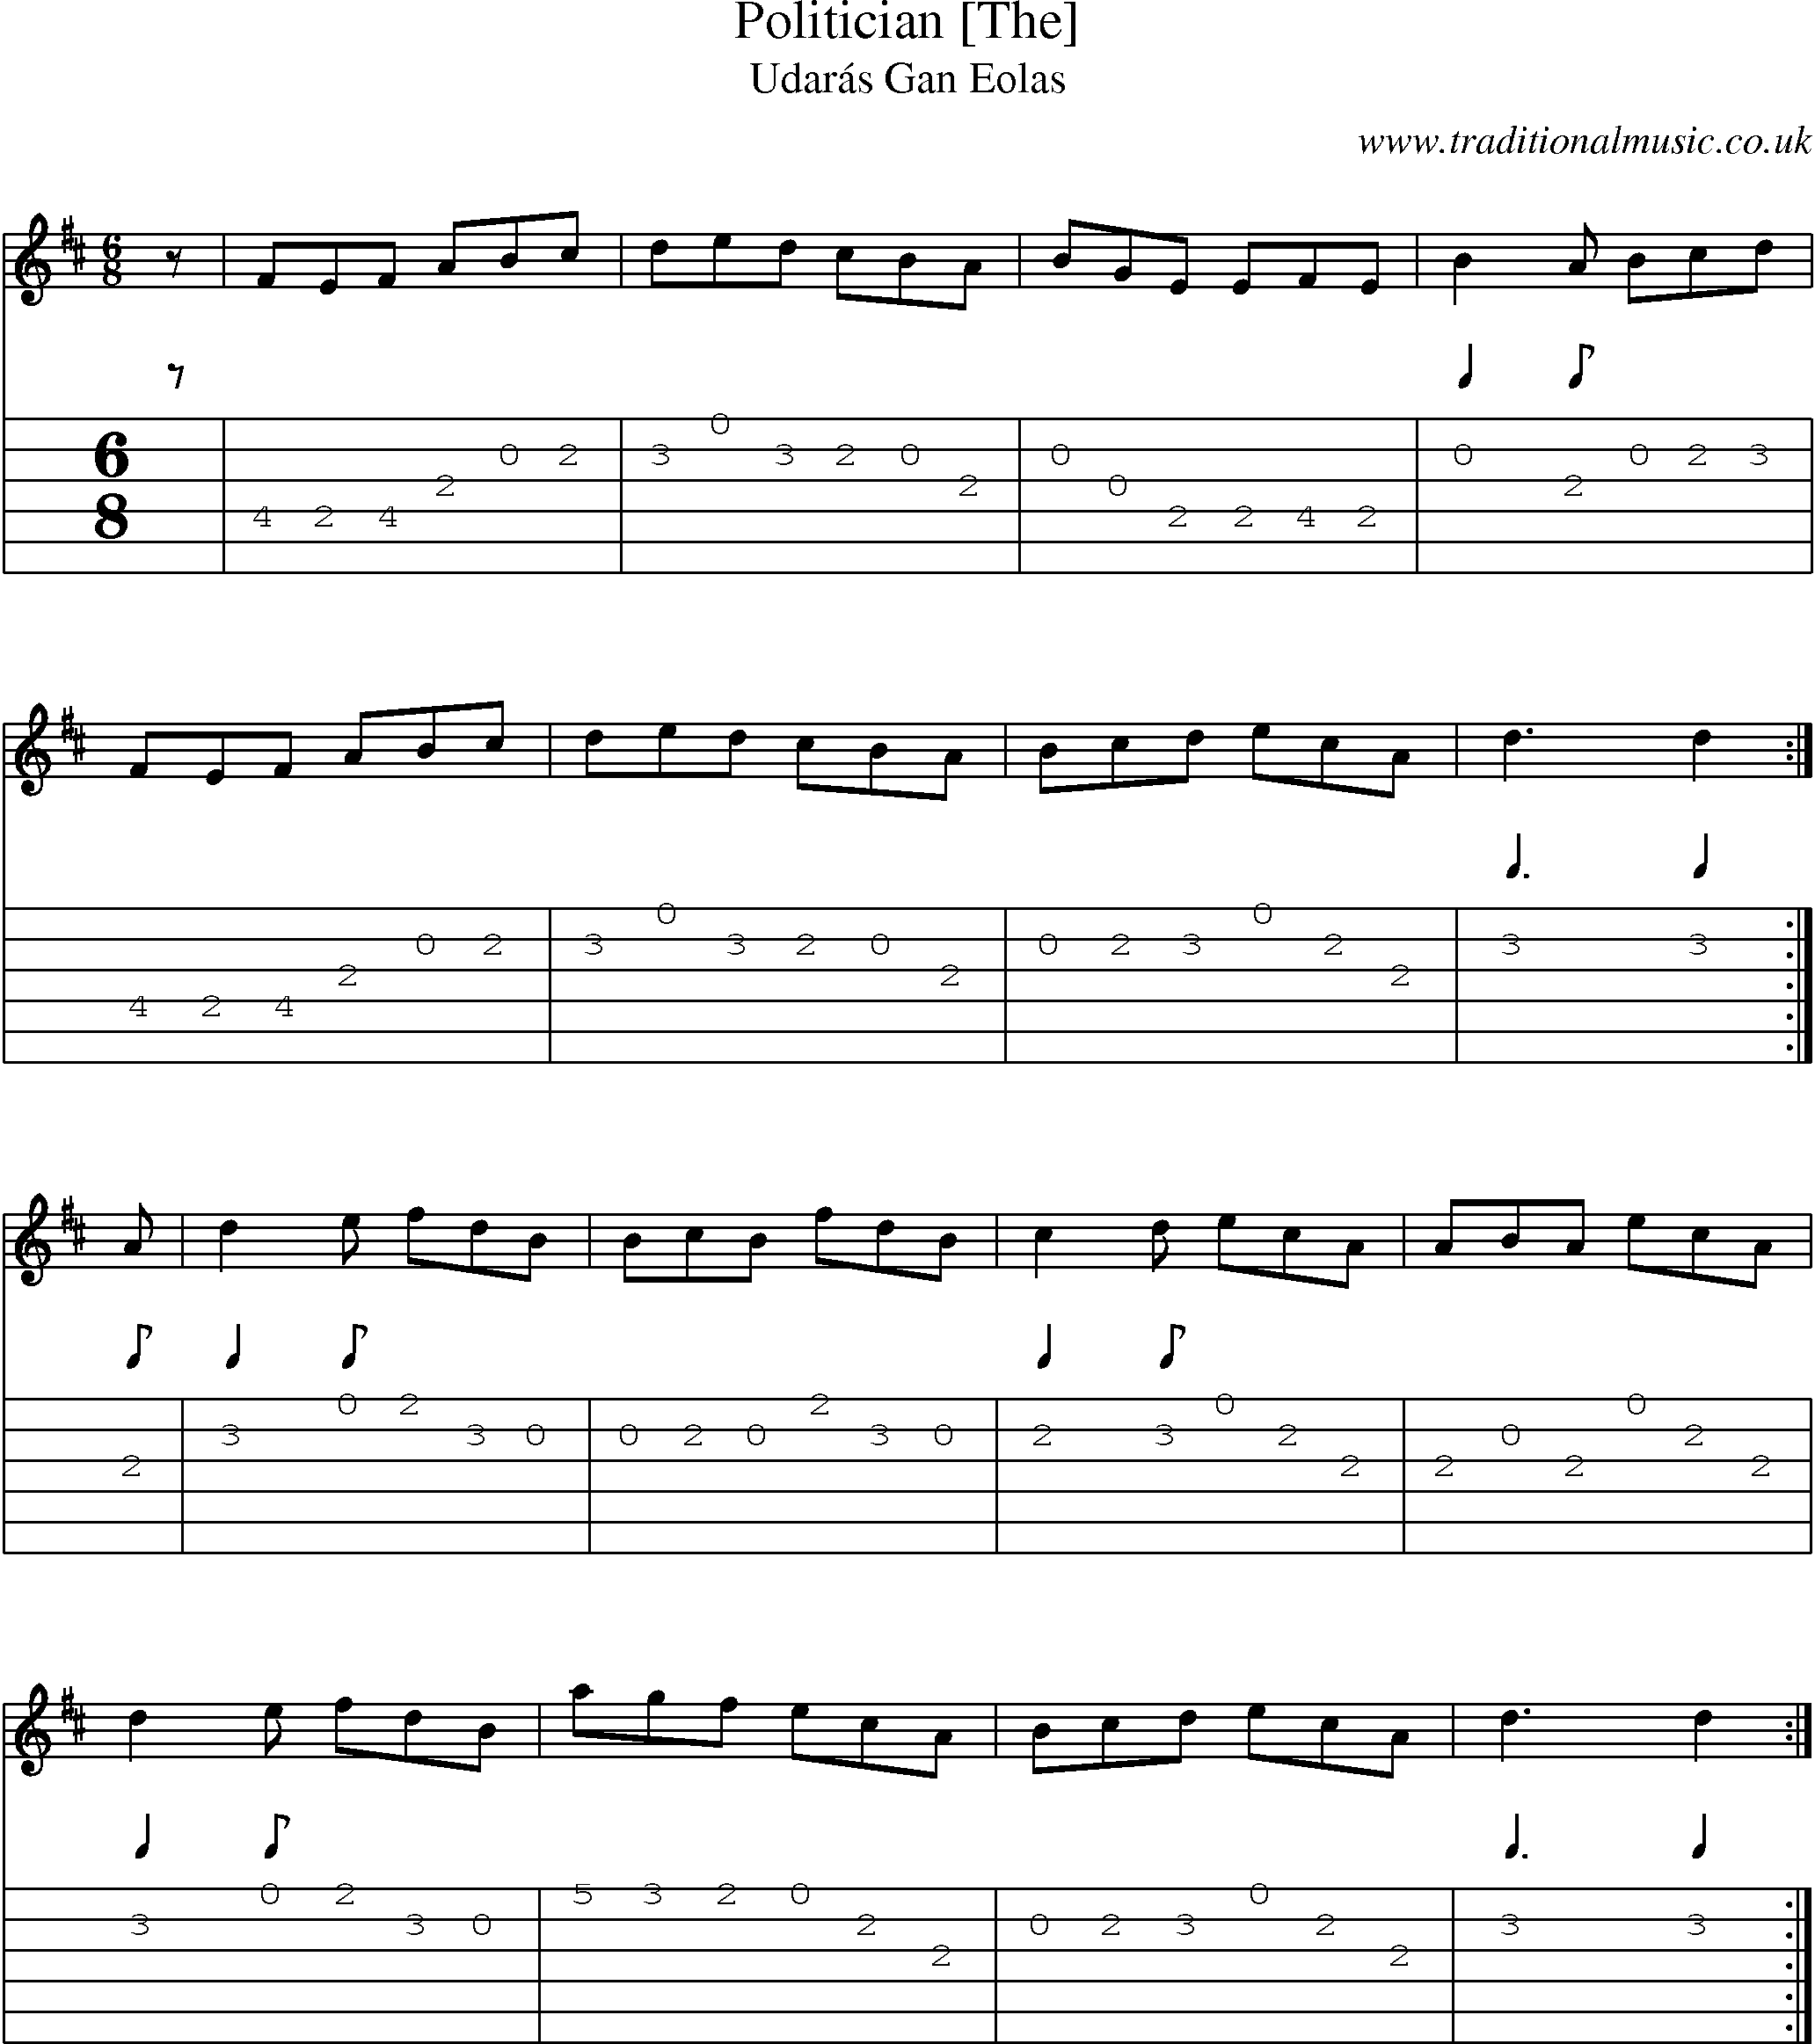 Music Score and Guitar Tabs for Politician